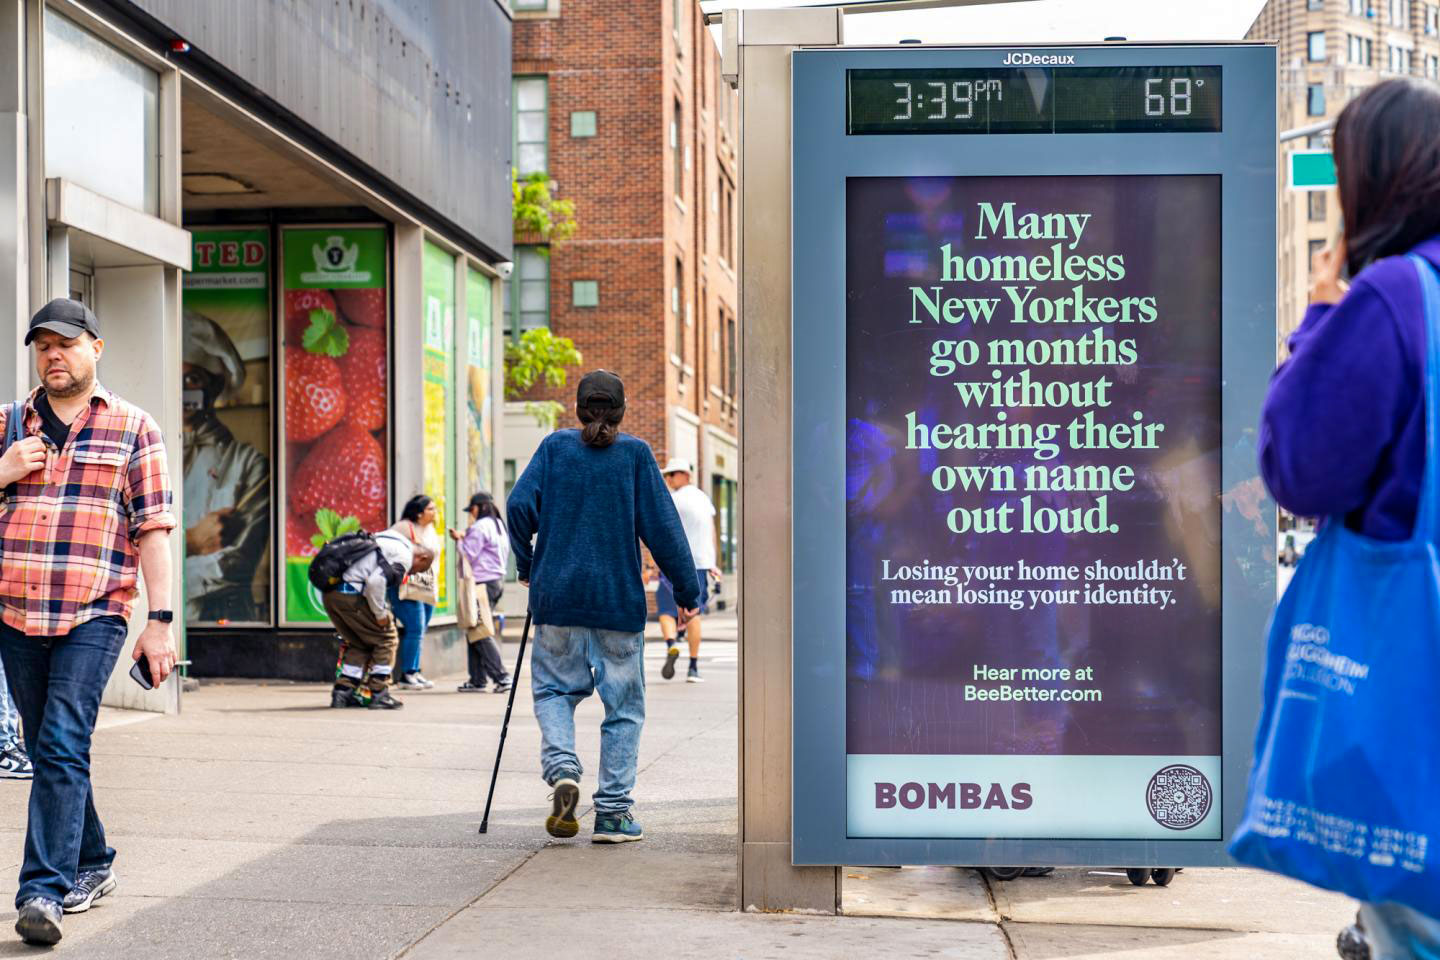 People walking by Bambas campaign on Homelessness in NYC